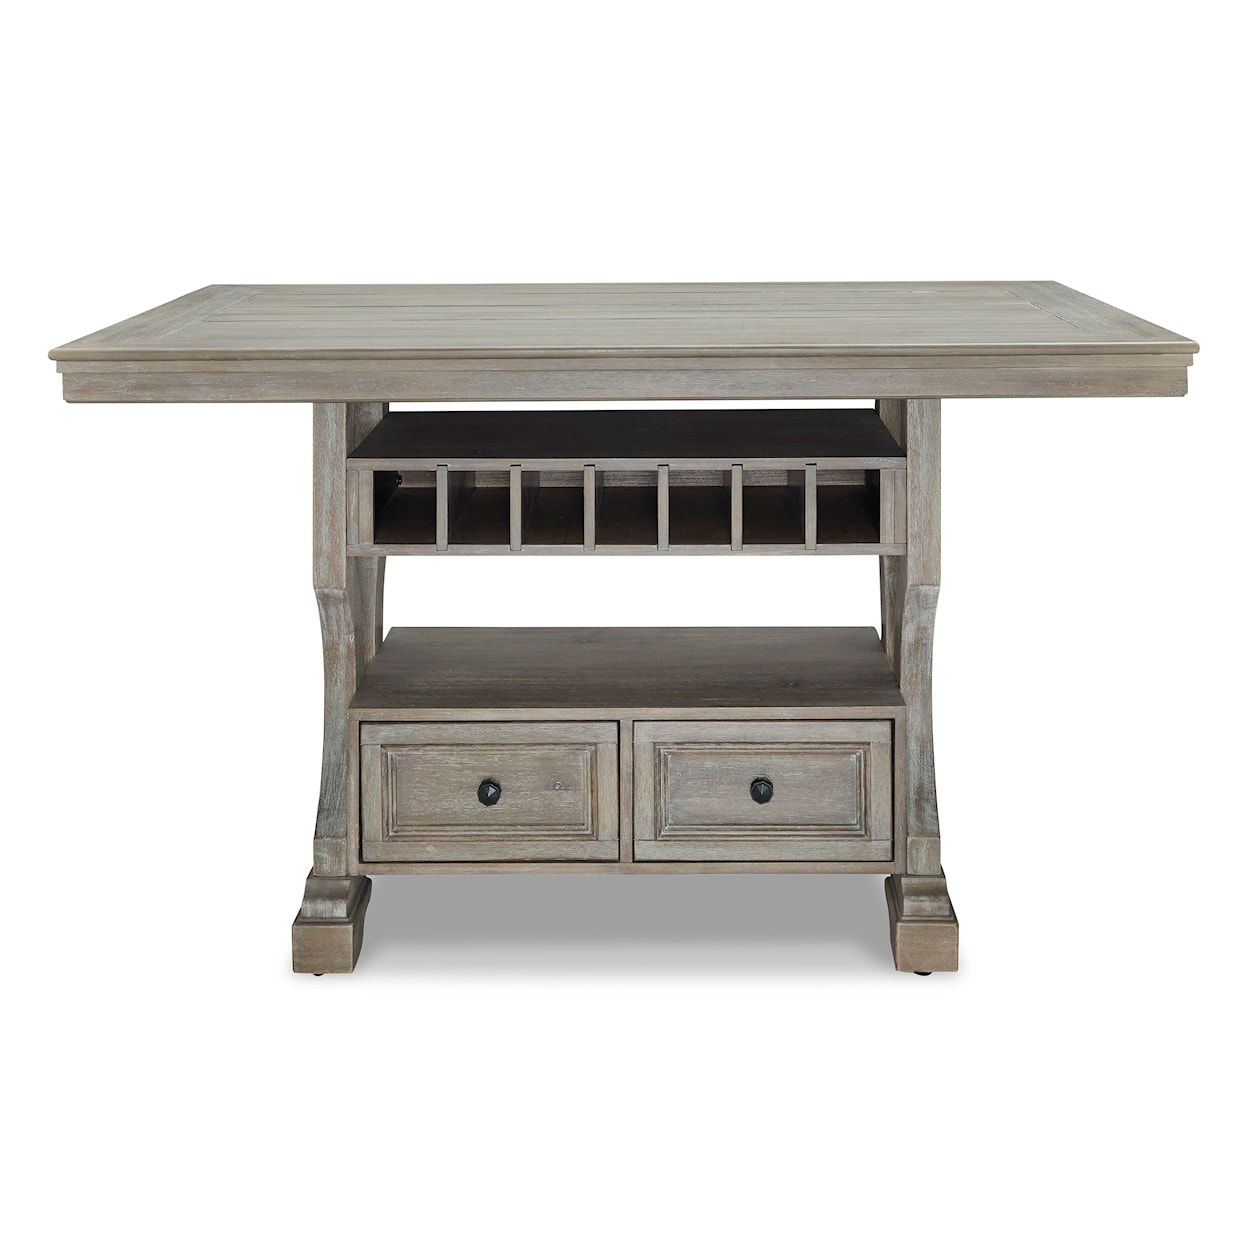 Signature Design by Ashley Furniture Moreshire Counter Height Dining Table